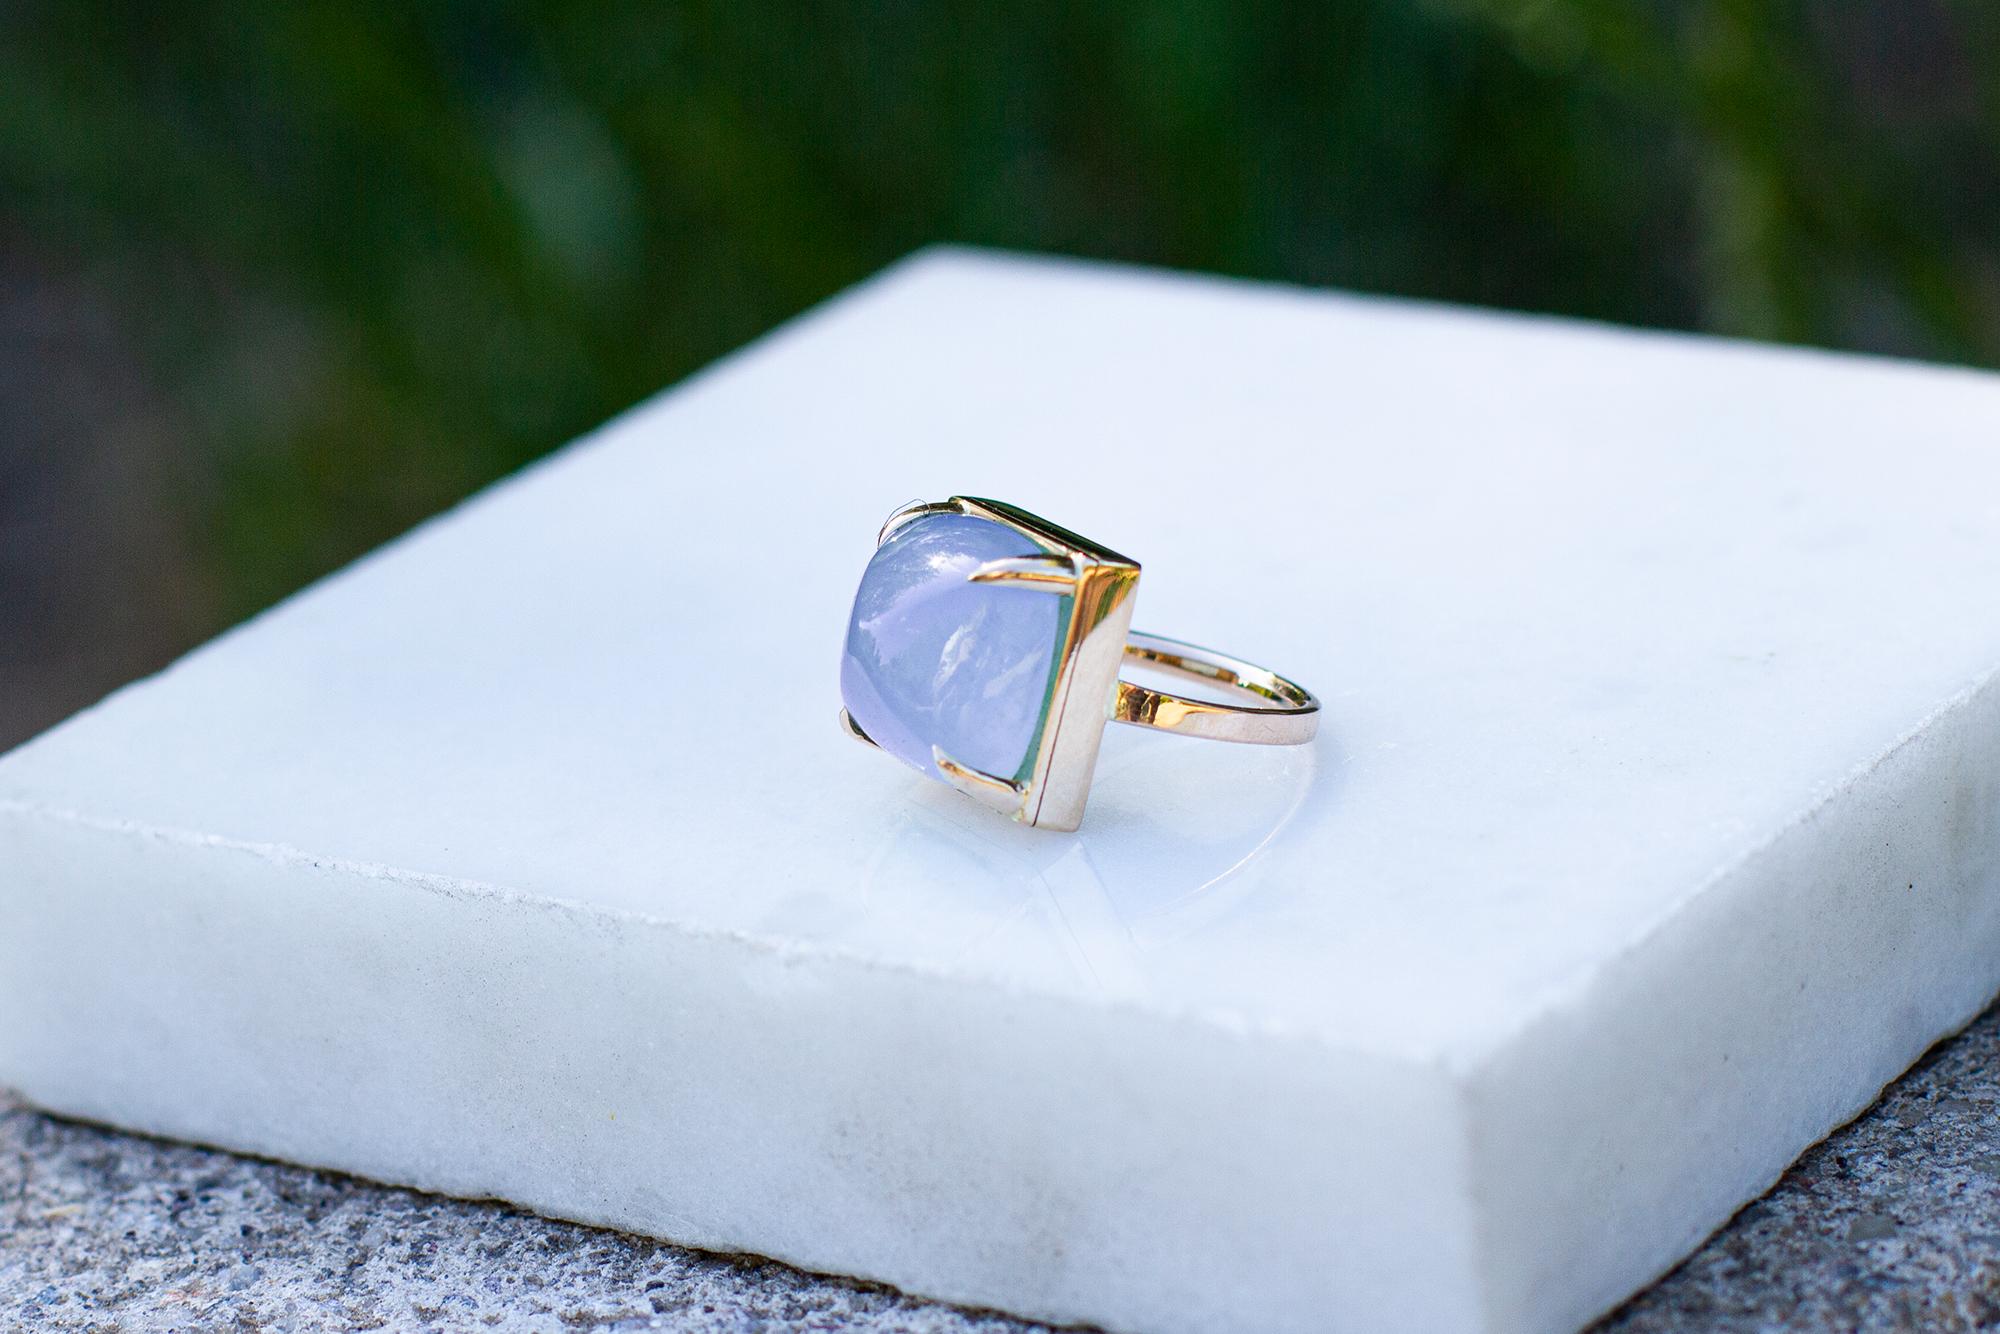 This ring is made of 18 karat rose gold and sugarloaf cut chalcedony.

When for most of the gem it works the way: the smaller prongs the better. This is the shape and size of the gem that we really enjoy to see avoiding the typical for sugarloaf